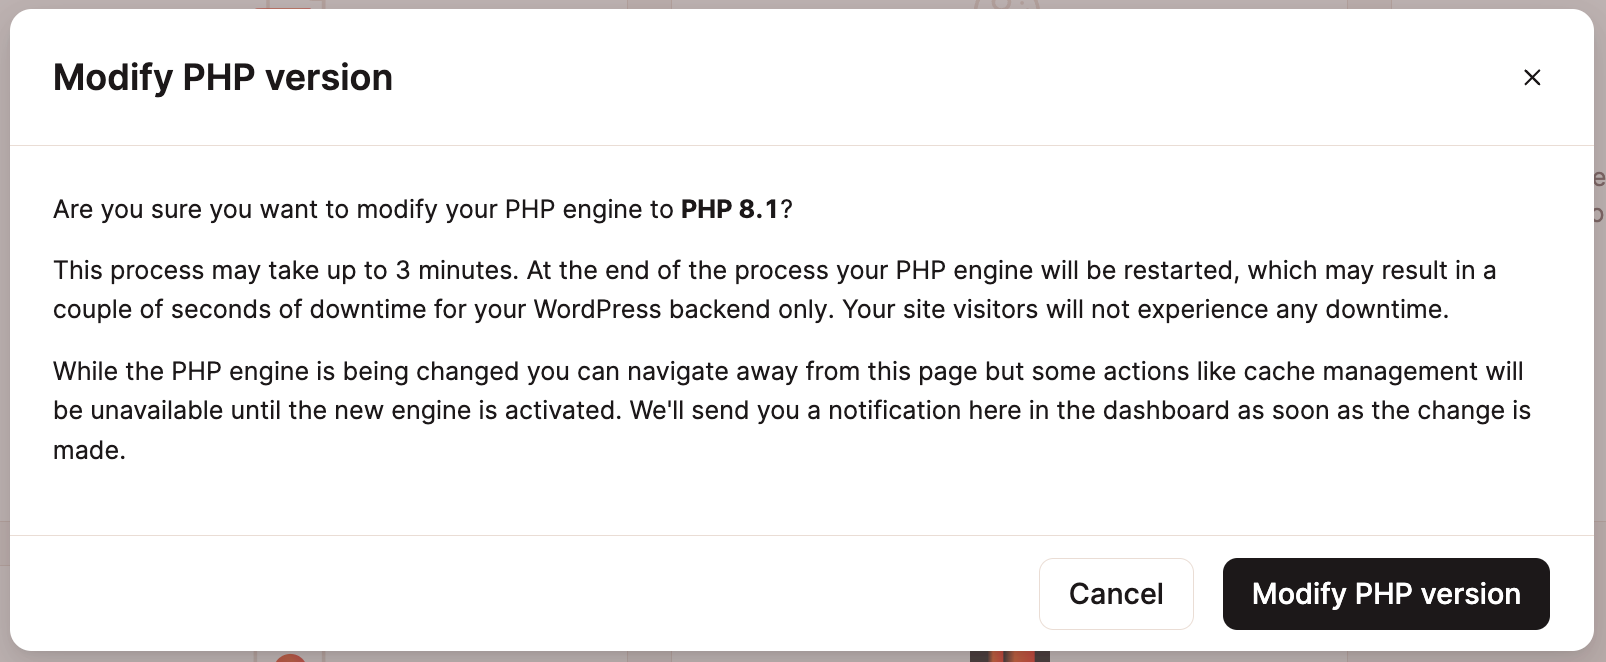 Screenshot of the confirmation prompt in MyKinsta for modifying the PHP version.